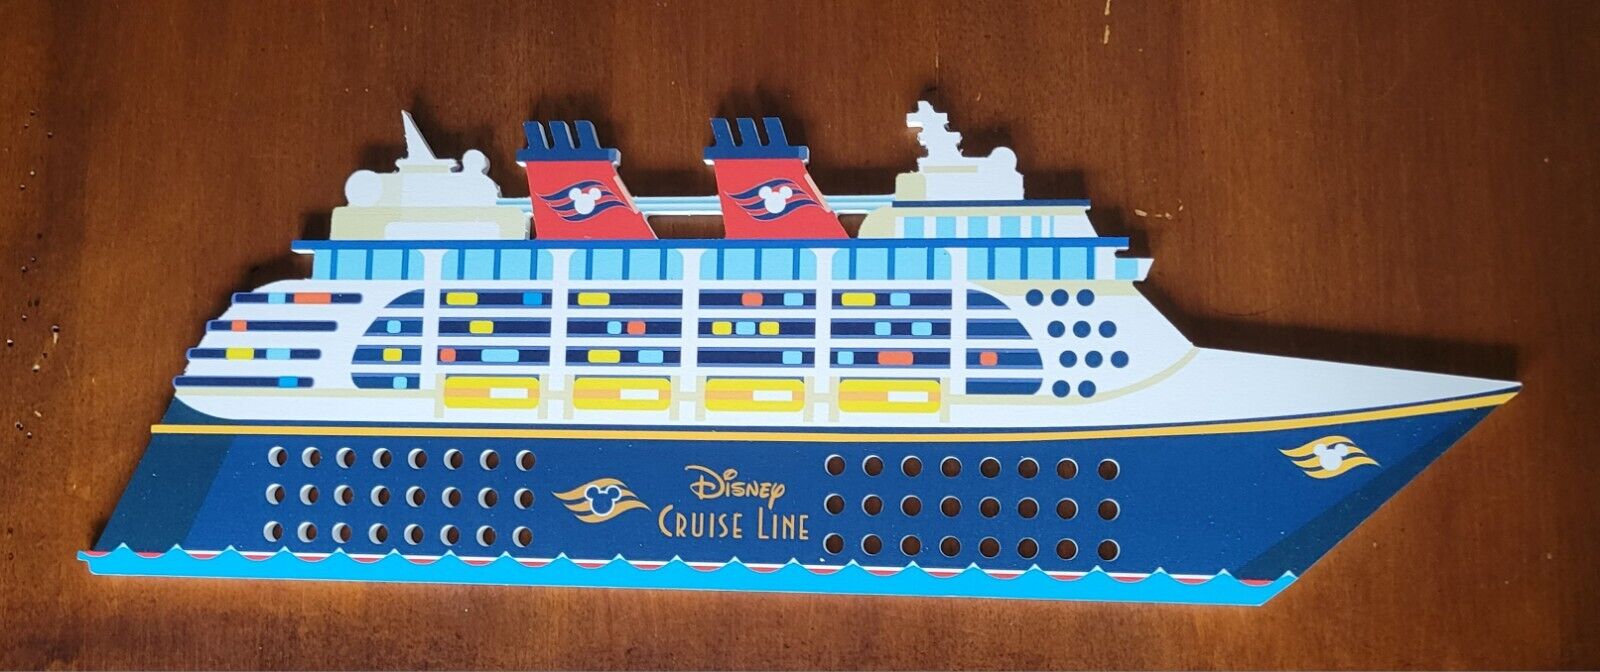 Disney Cruise Ship with or without L.E.D Lights